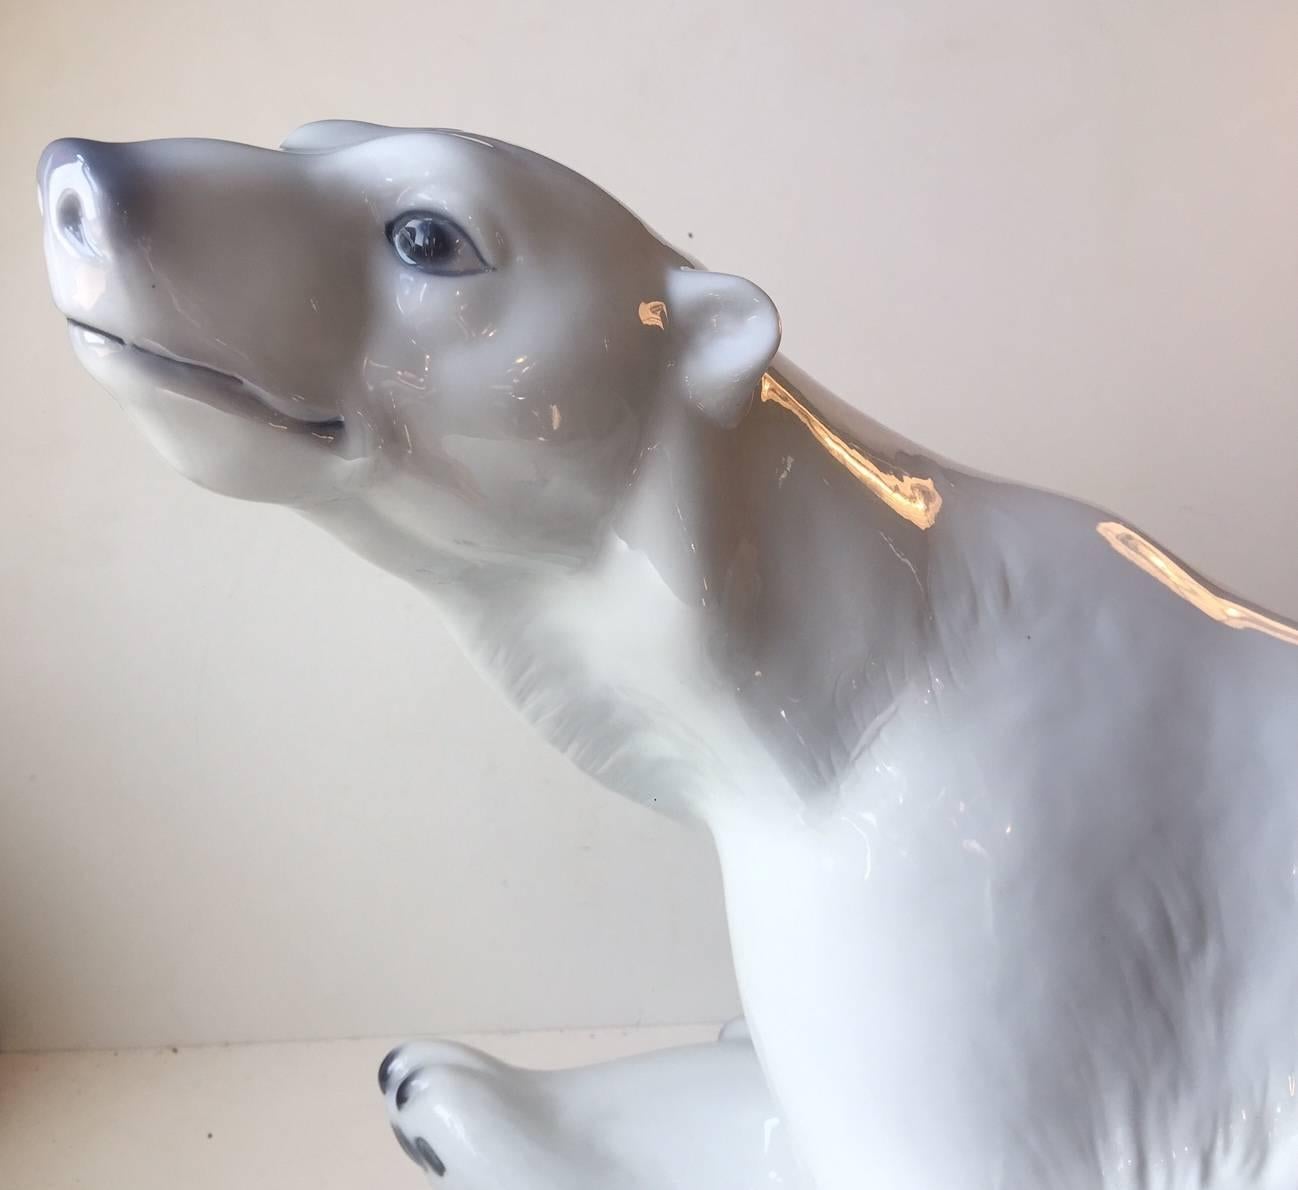 This porcelain polar bear by Danish B&G is the largest Version made by the company. It is model number 1954 and it was designed by Niels Nielsen. These giant Bears, almost the size of a medium dog, were only made in a very limited number. This Bear